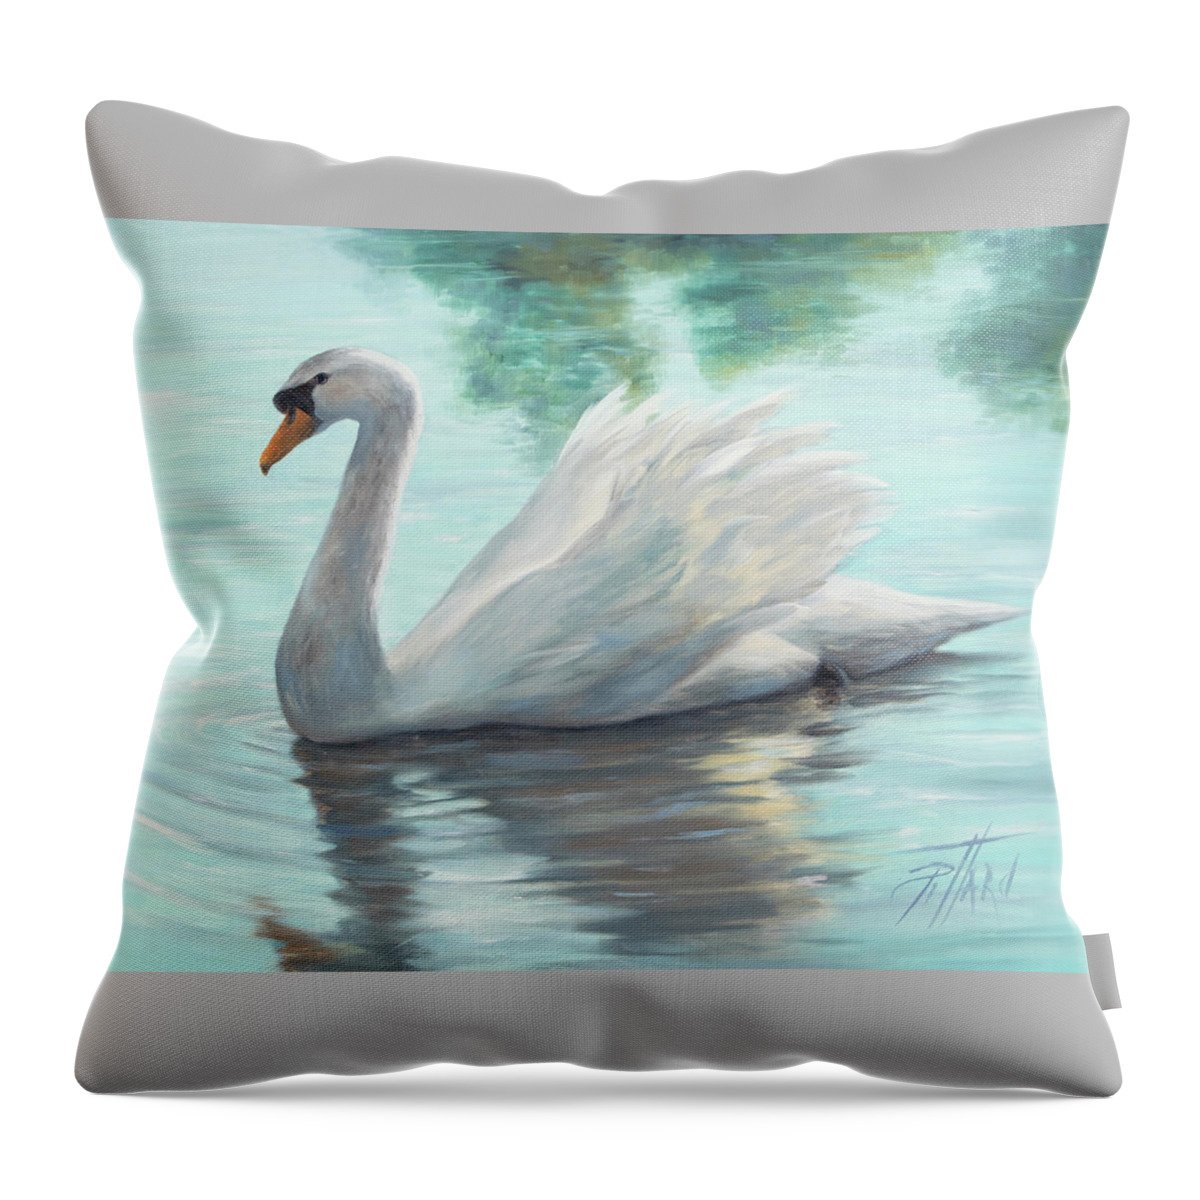 White Swan Throw Pillow featuring the painting An Elegant White Swan by Lynne Pittard